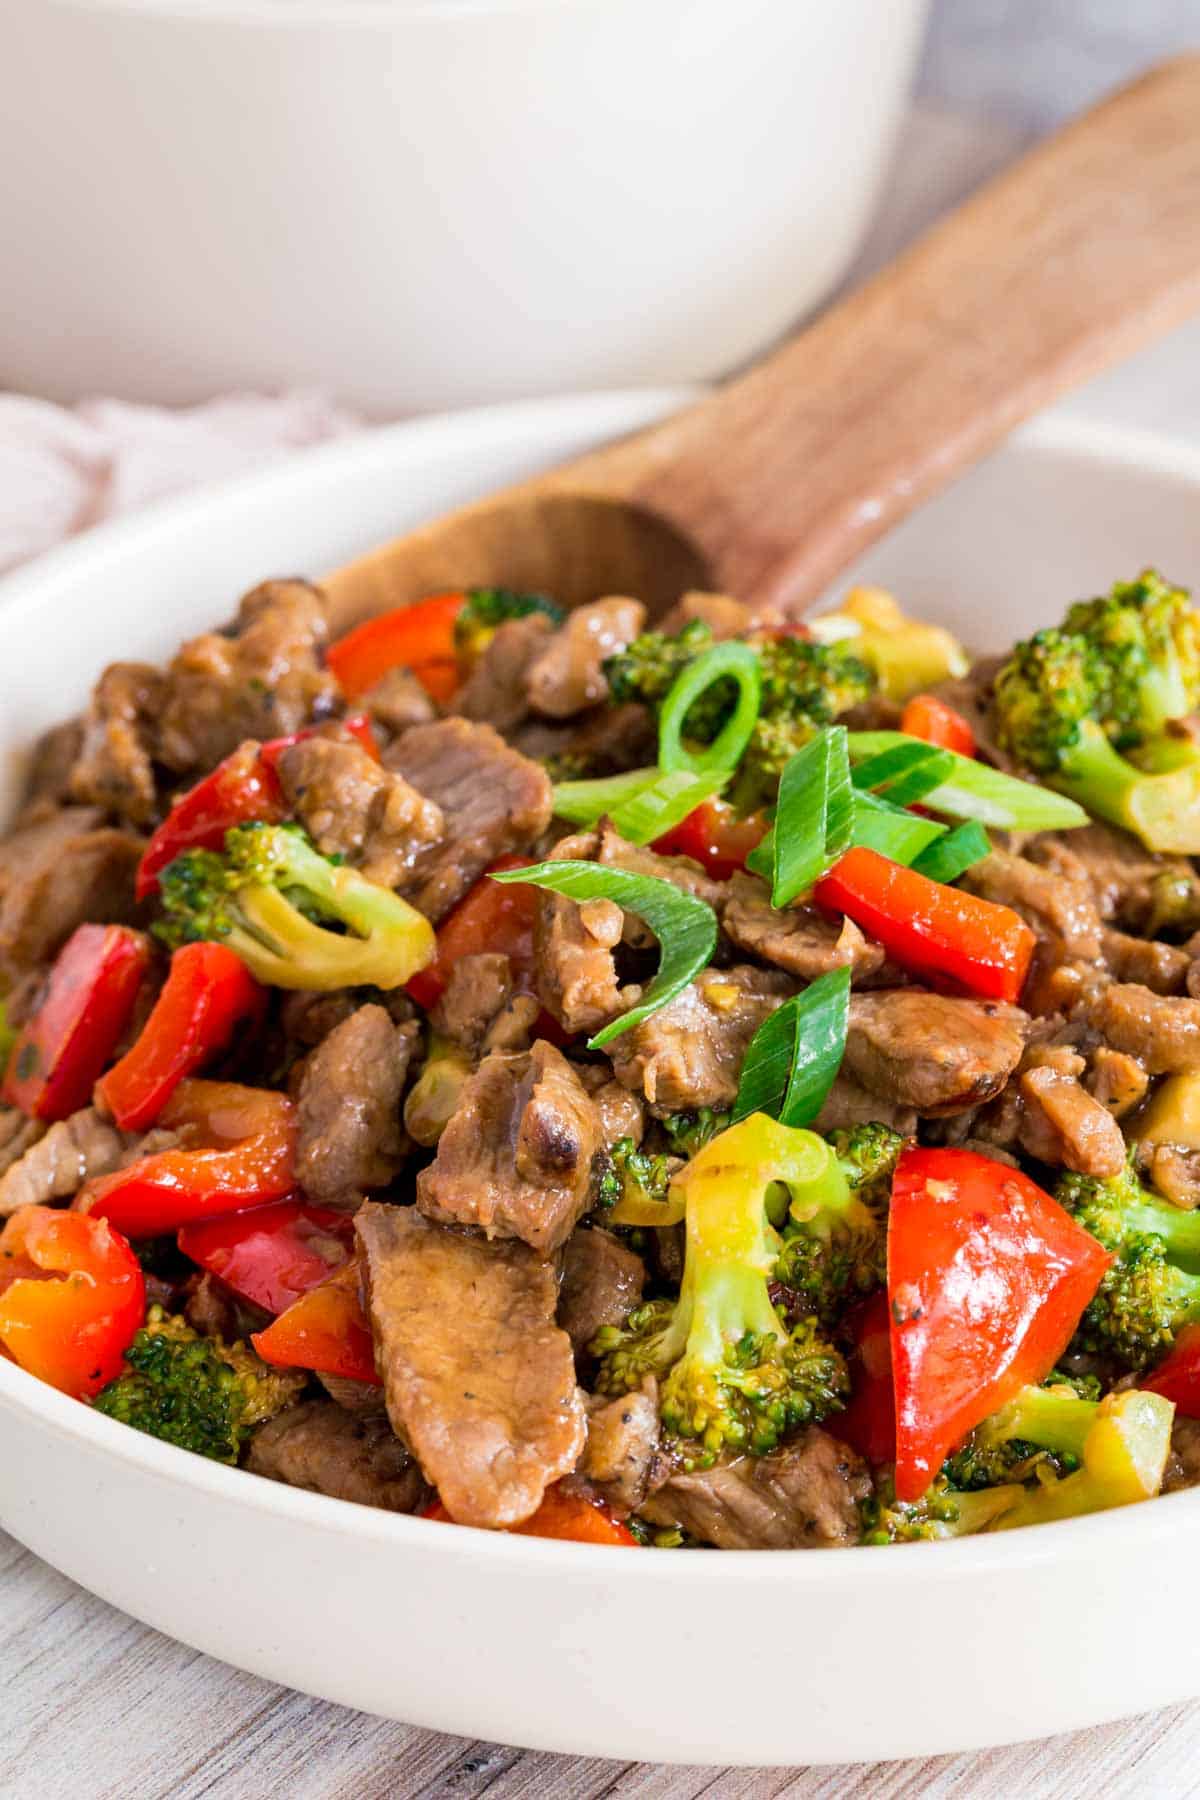 stir fry of steak strips, broccoli and red peppers in a sauce topped with sliced scallions in a white serving bowl